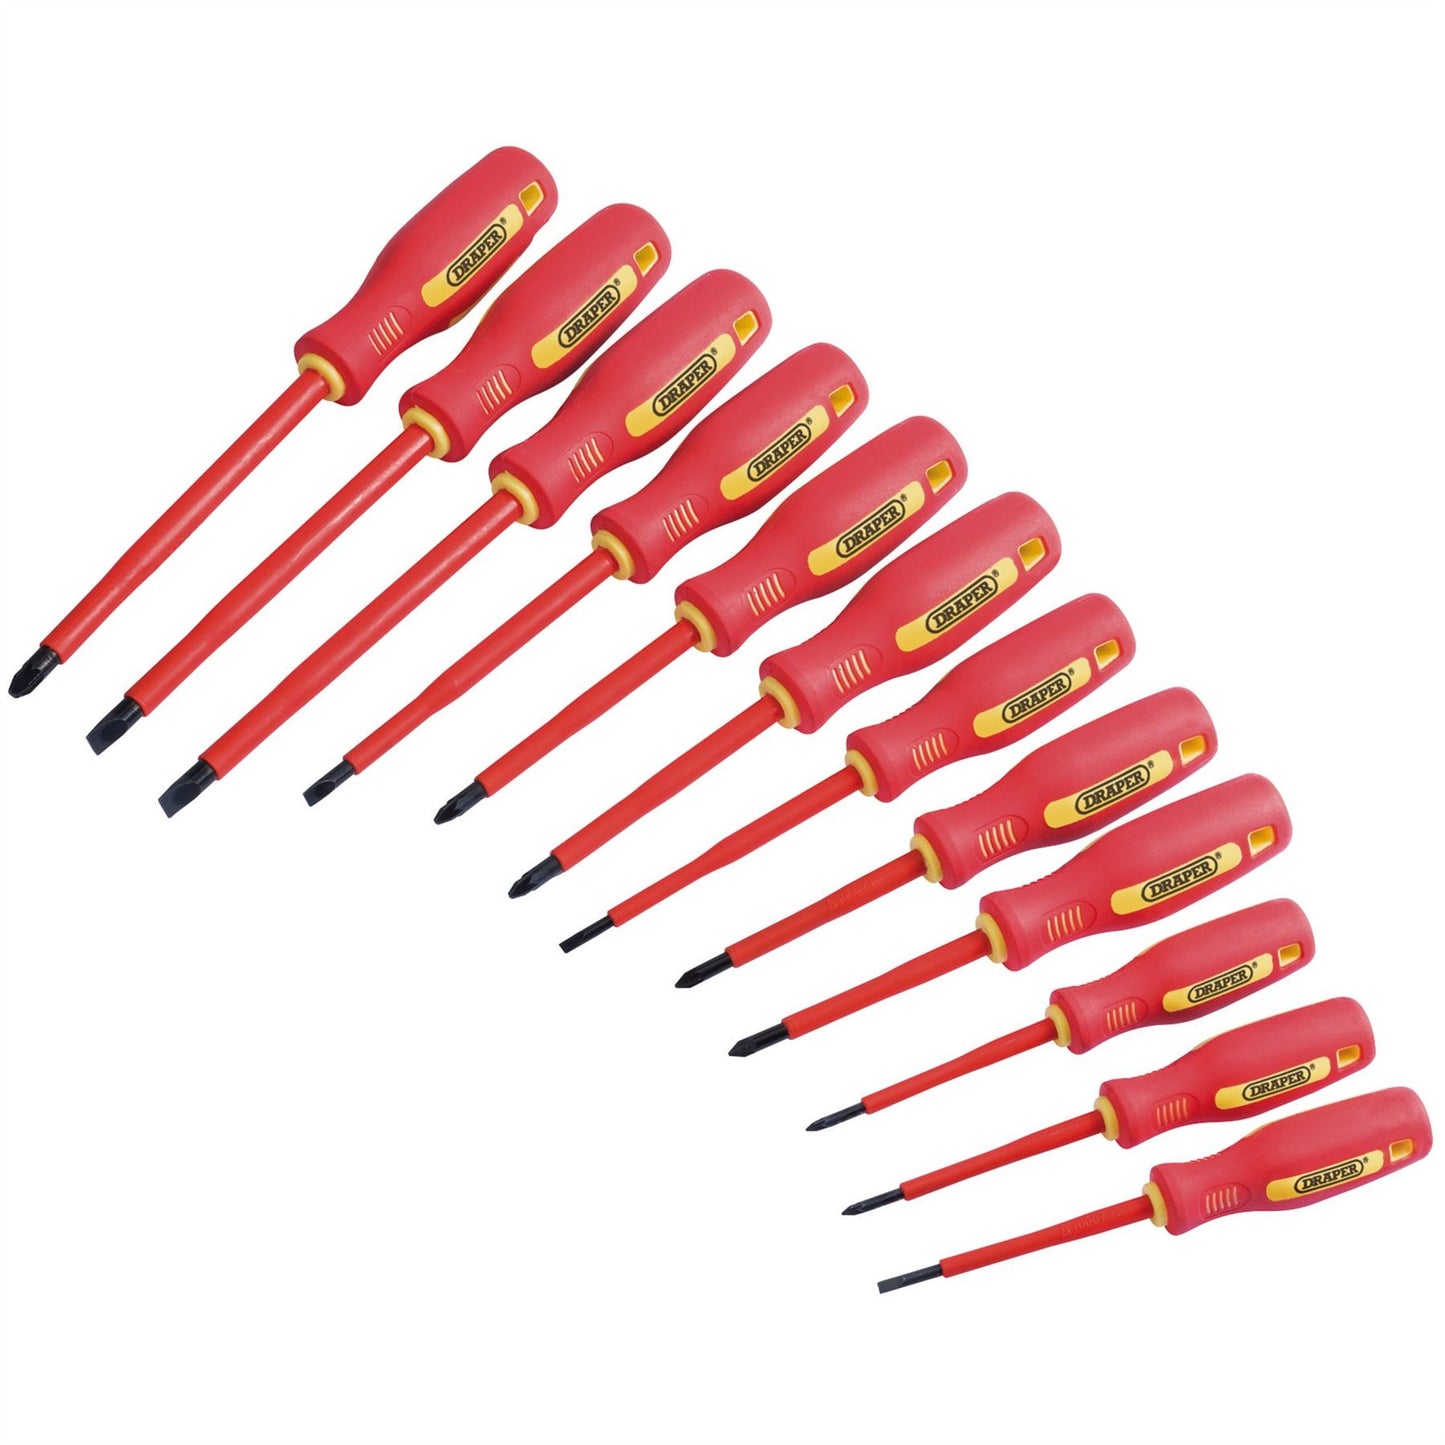 Fully Insulated VDE Screwdriver 12pc Professional Electricians Set Draper 46541